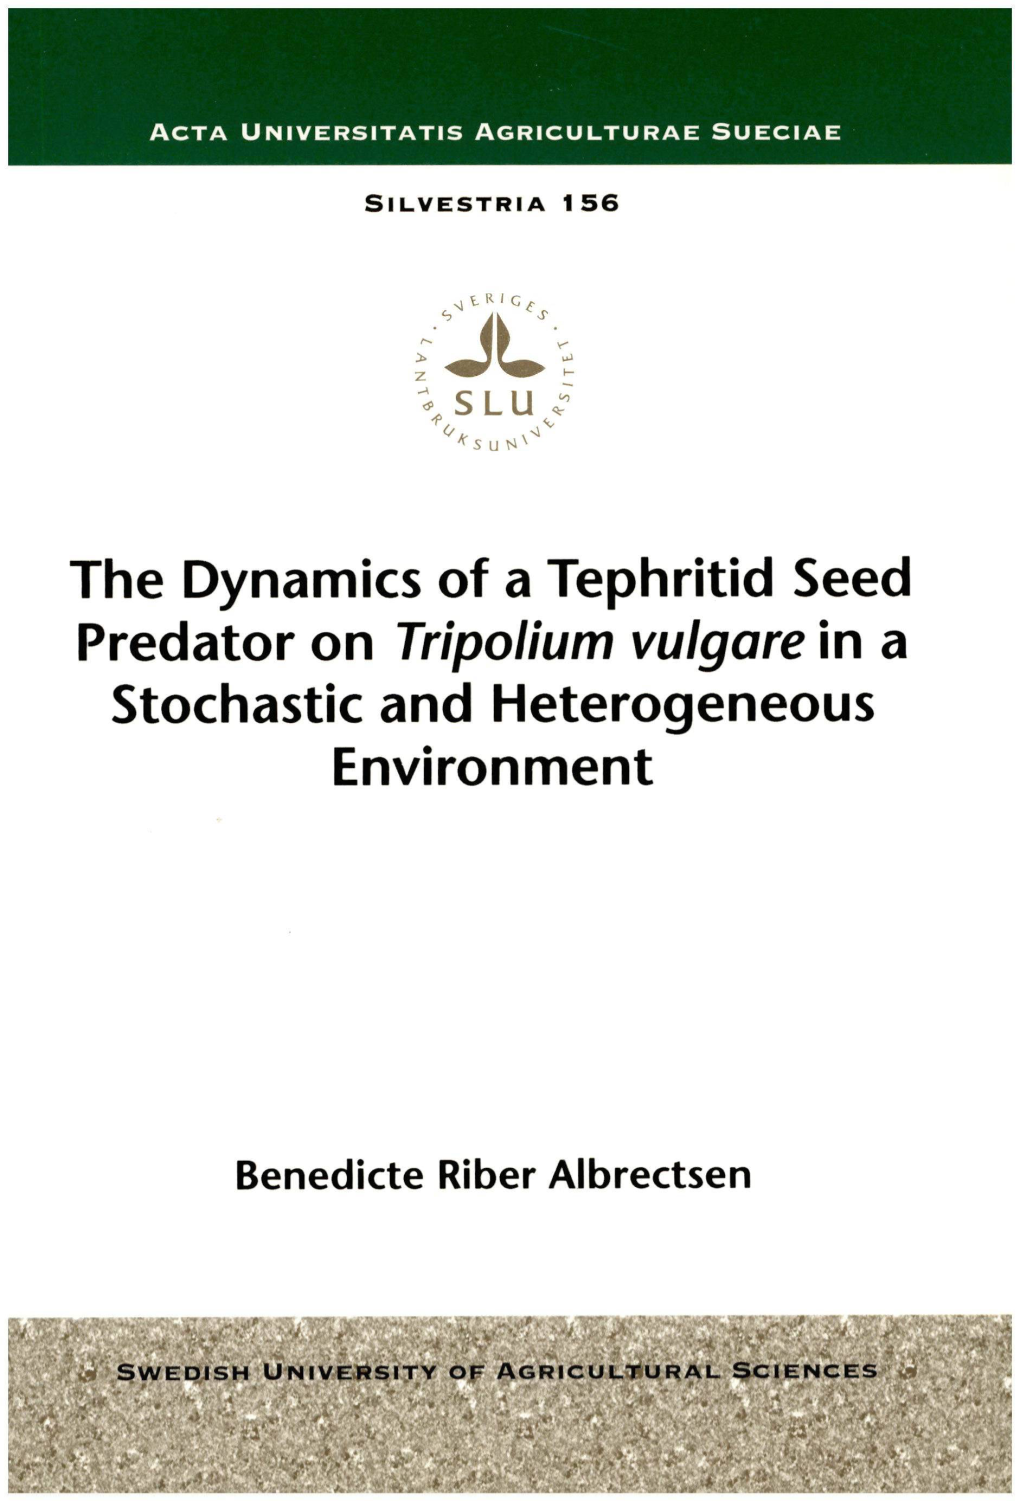 The Dynamics of a Tephritid Seed Predator on Tripolium Vulgare in a Stochastic and Heterogeneous Environment